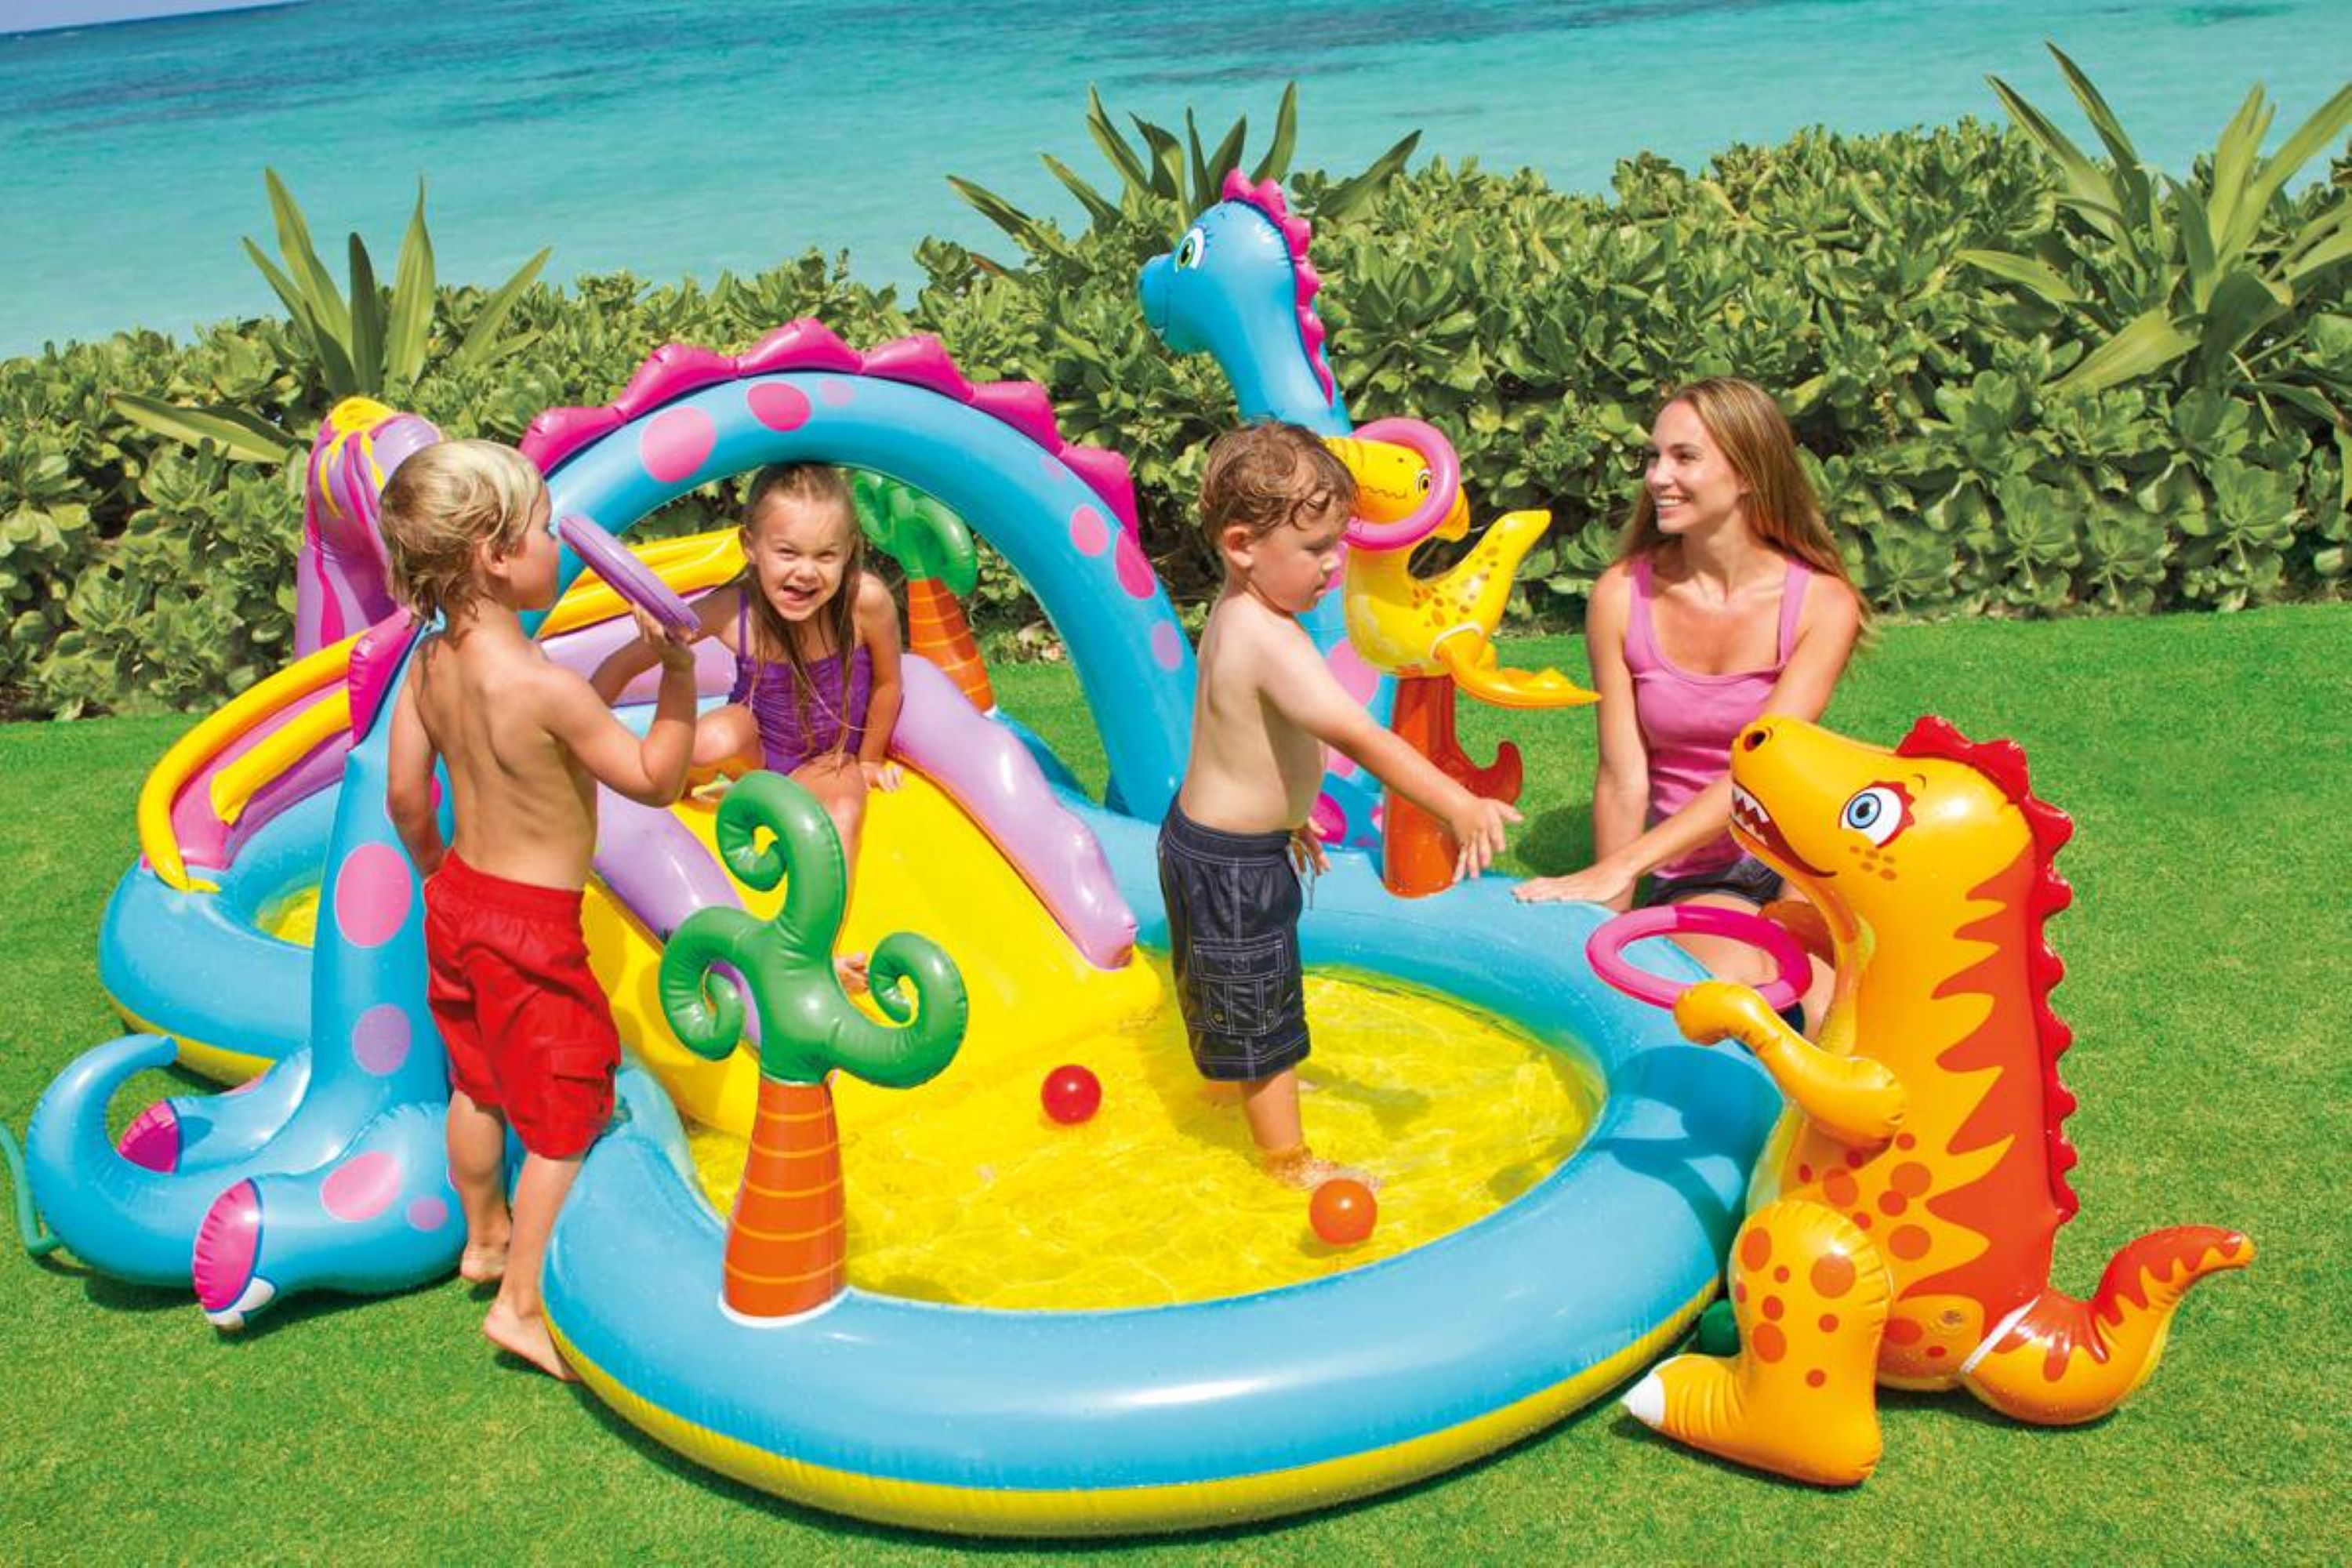 Intex 11ft x 7.5ft x 44in Dinoland Play Center Kiddie Inflatable Swimming Pool - image 3 of 6